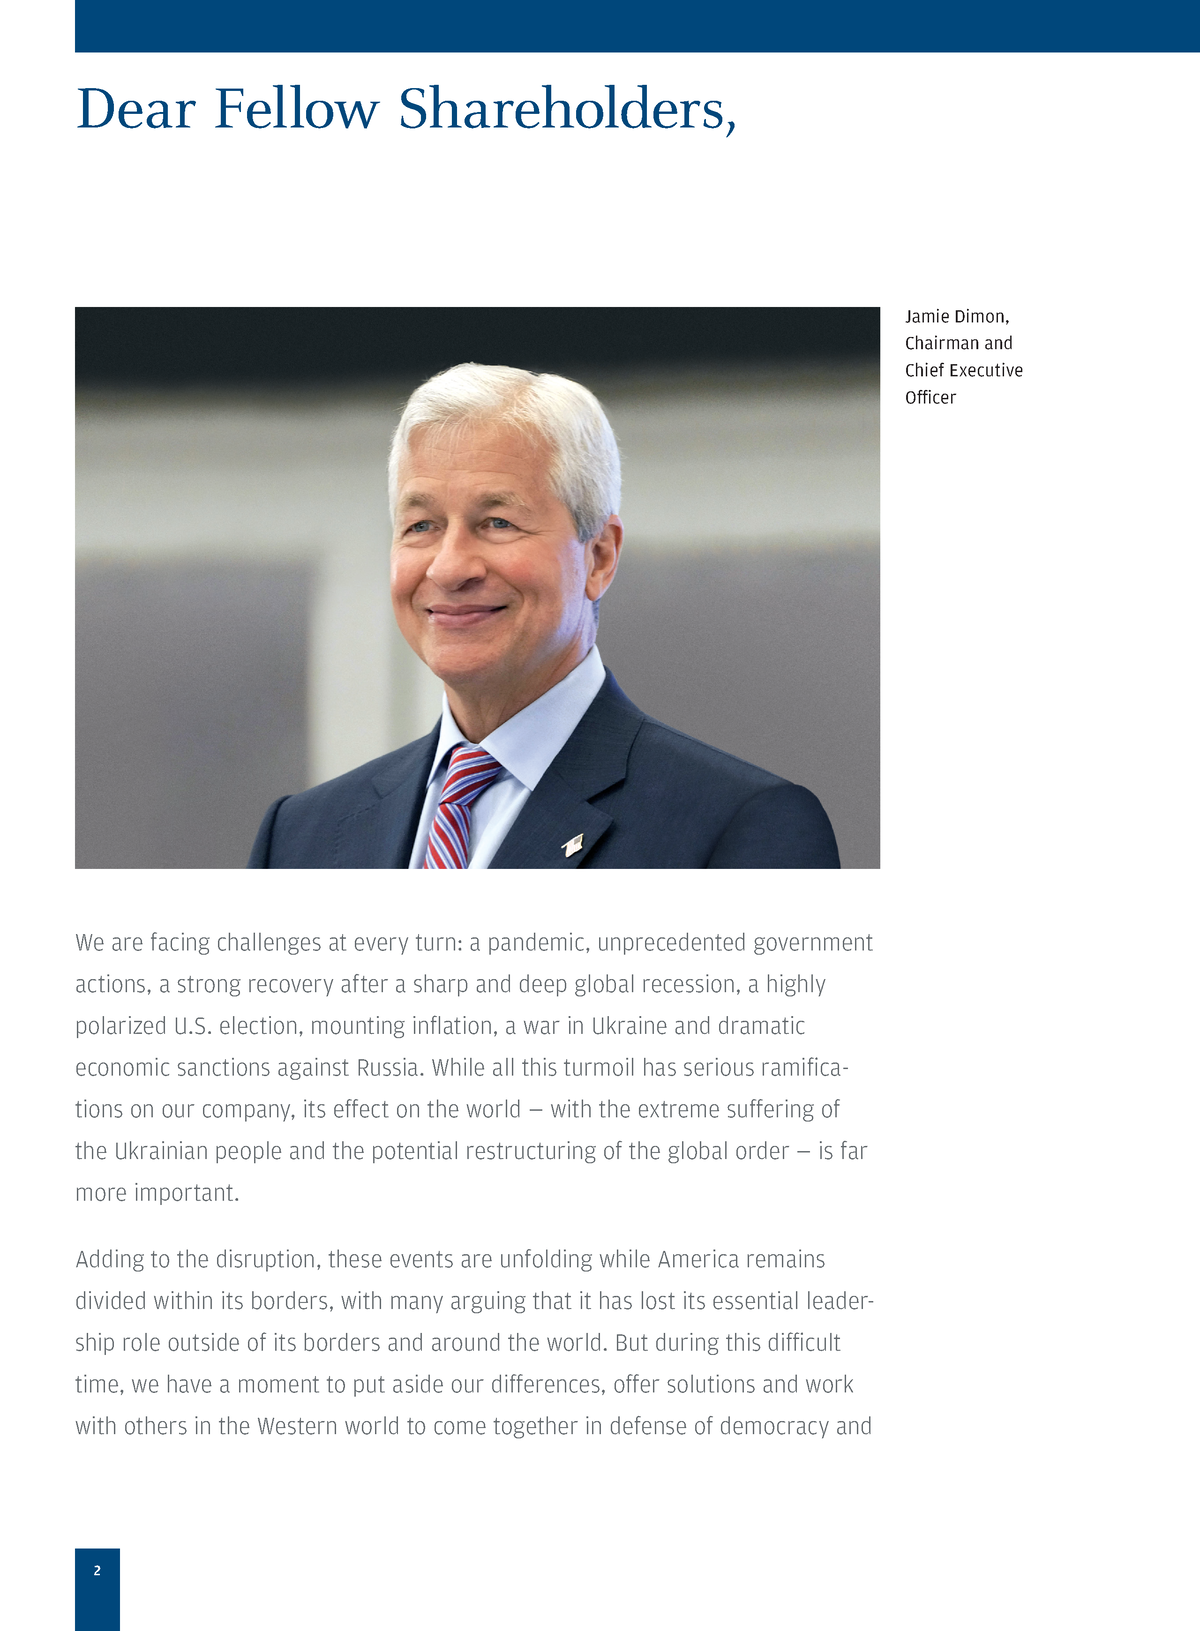 Ceo letter to shareholders 2021 Jamie Dimon, Chairman and Chief